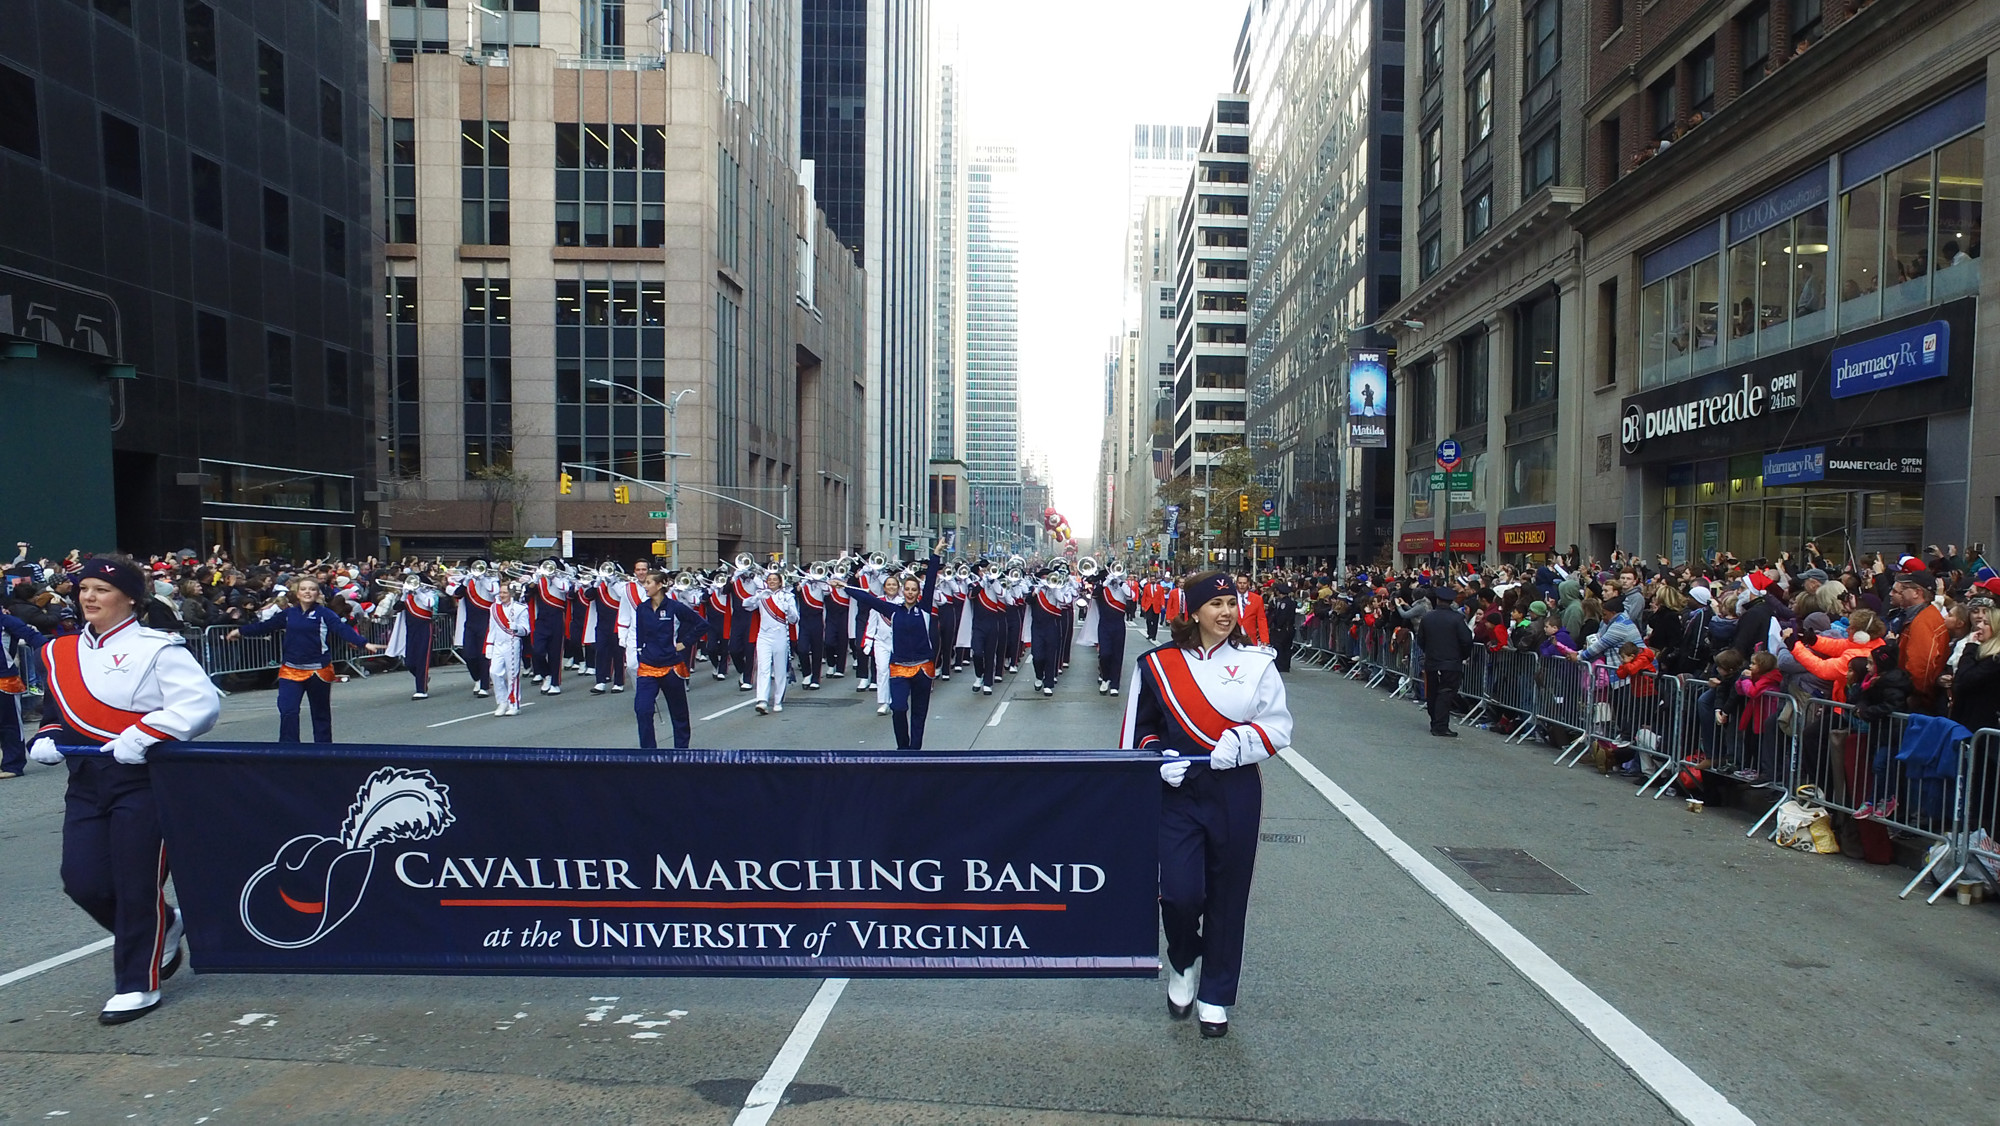 Cavalier Marching Band marching the streets of New York City during a parade